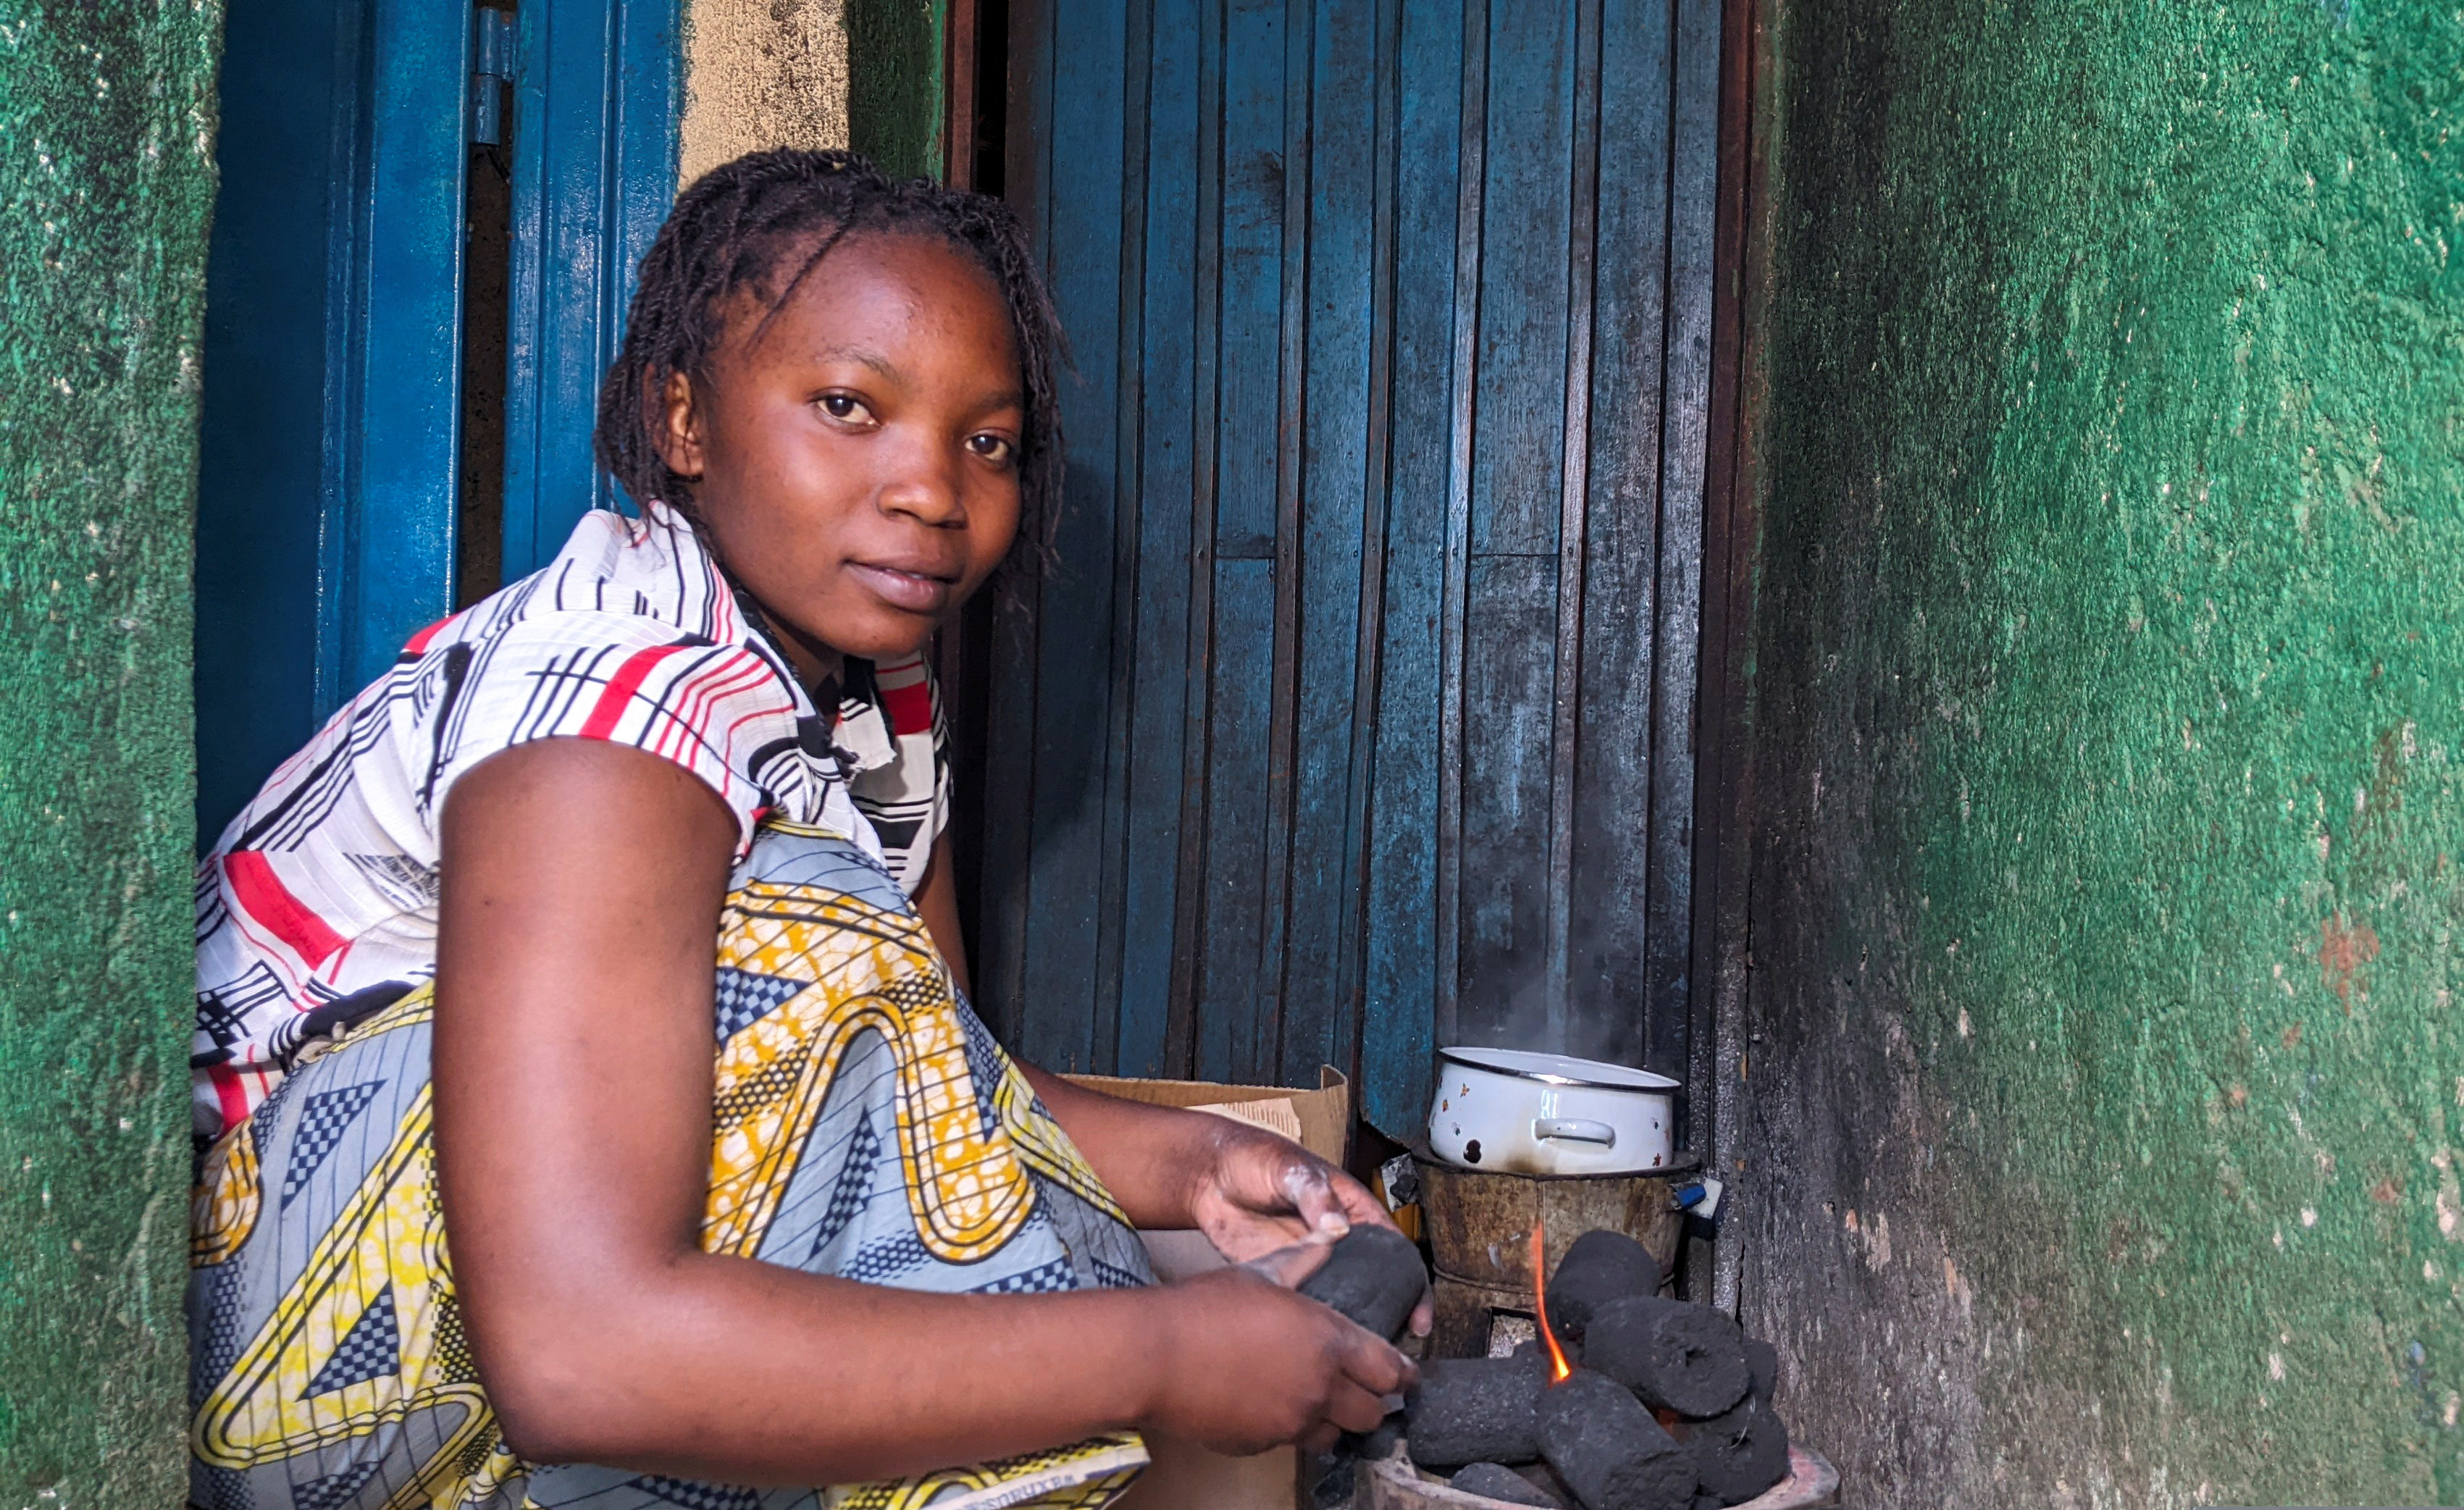 A woman lights an eco-friendly cooking charcoal stove in the Democratic Republic of Congo.